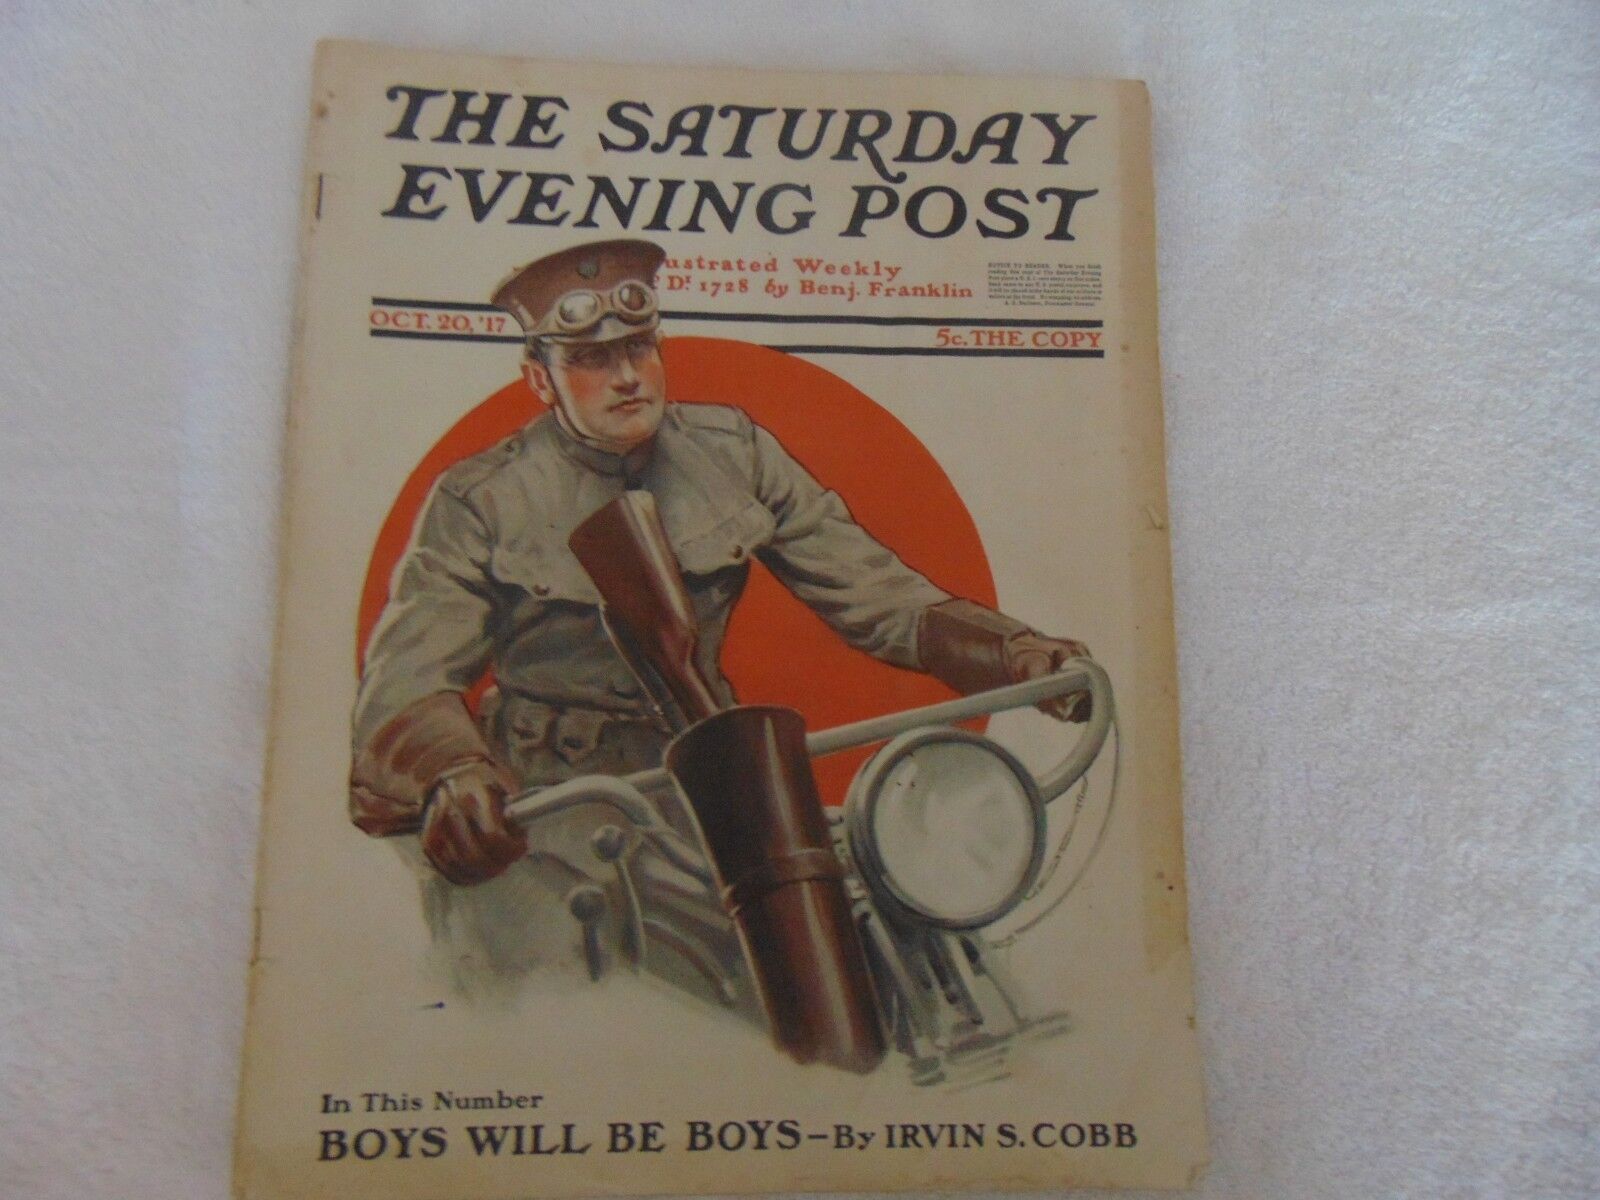  Saturday Evening Post Magazine WWI Soldier on War Motorcycle  October 20 1917